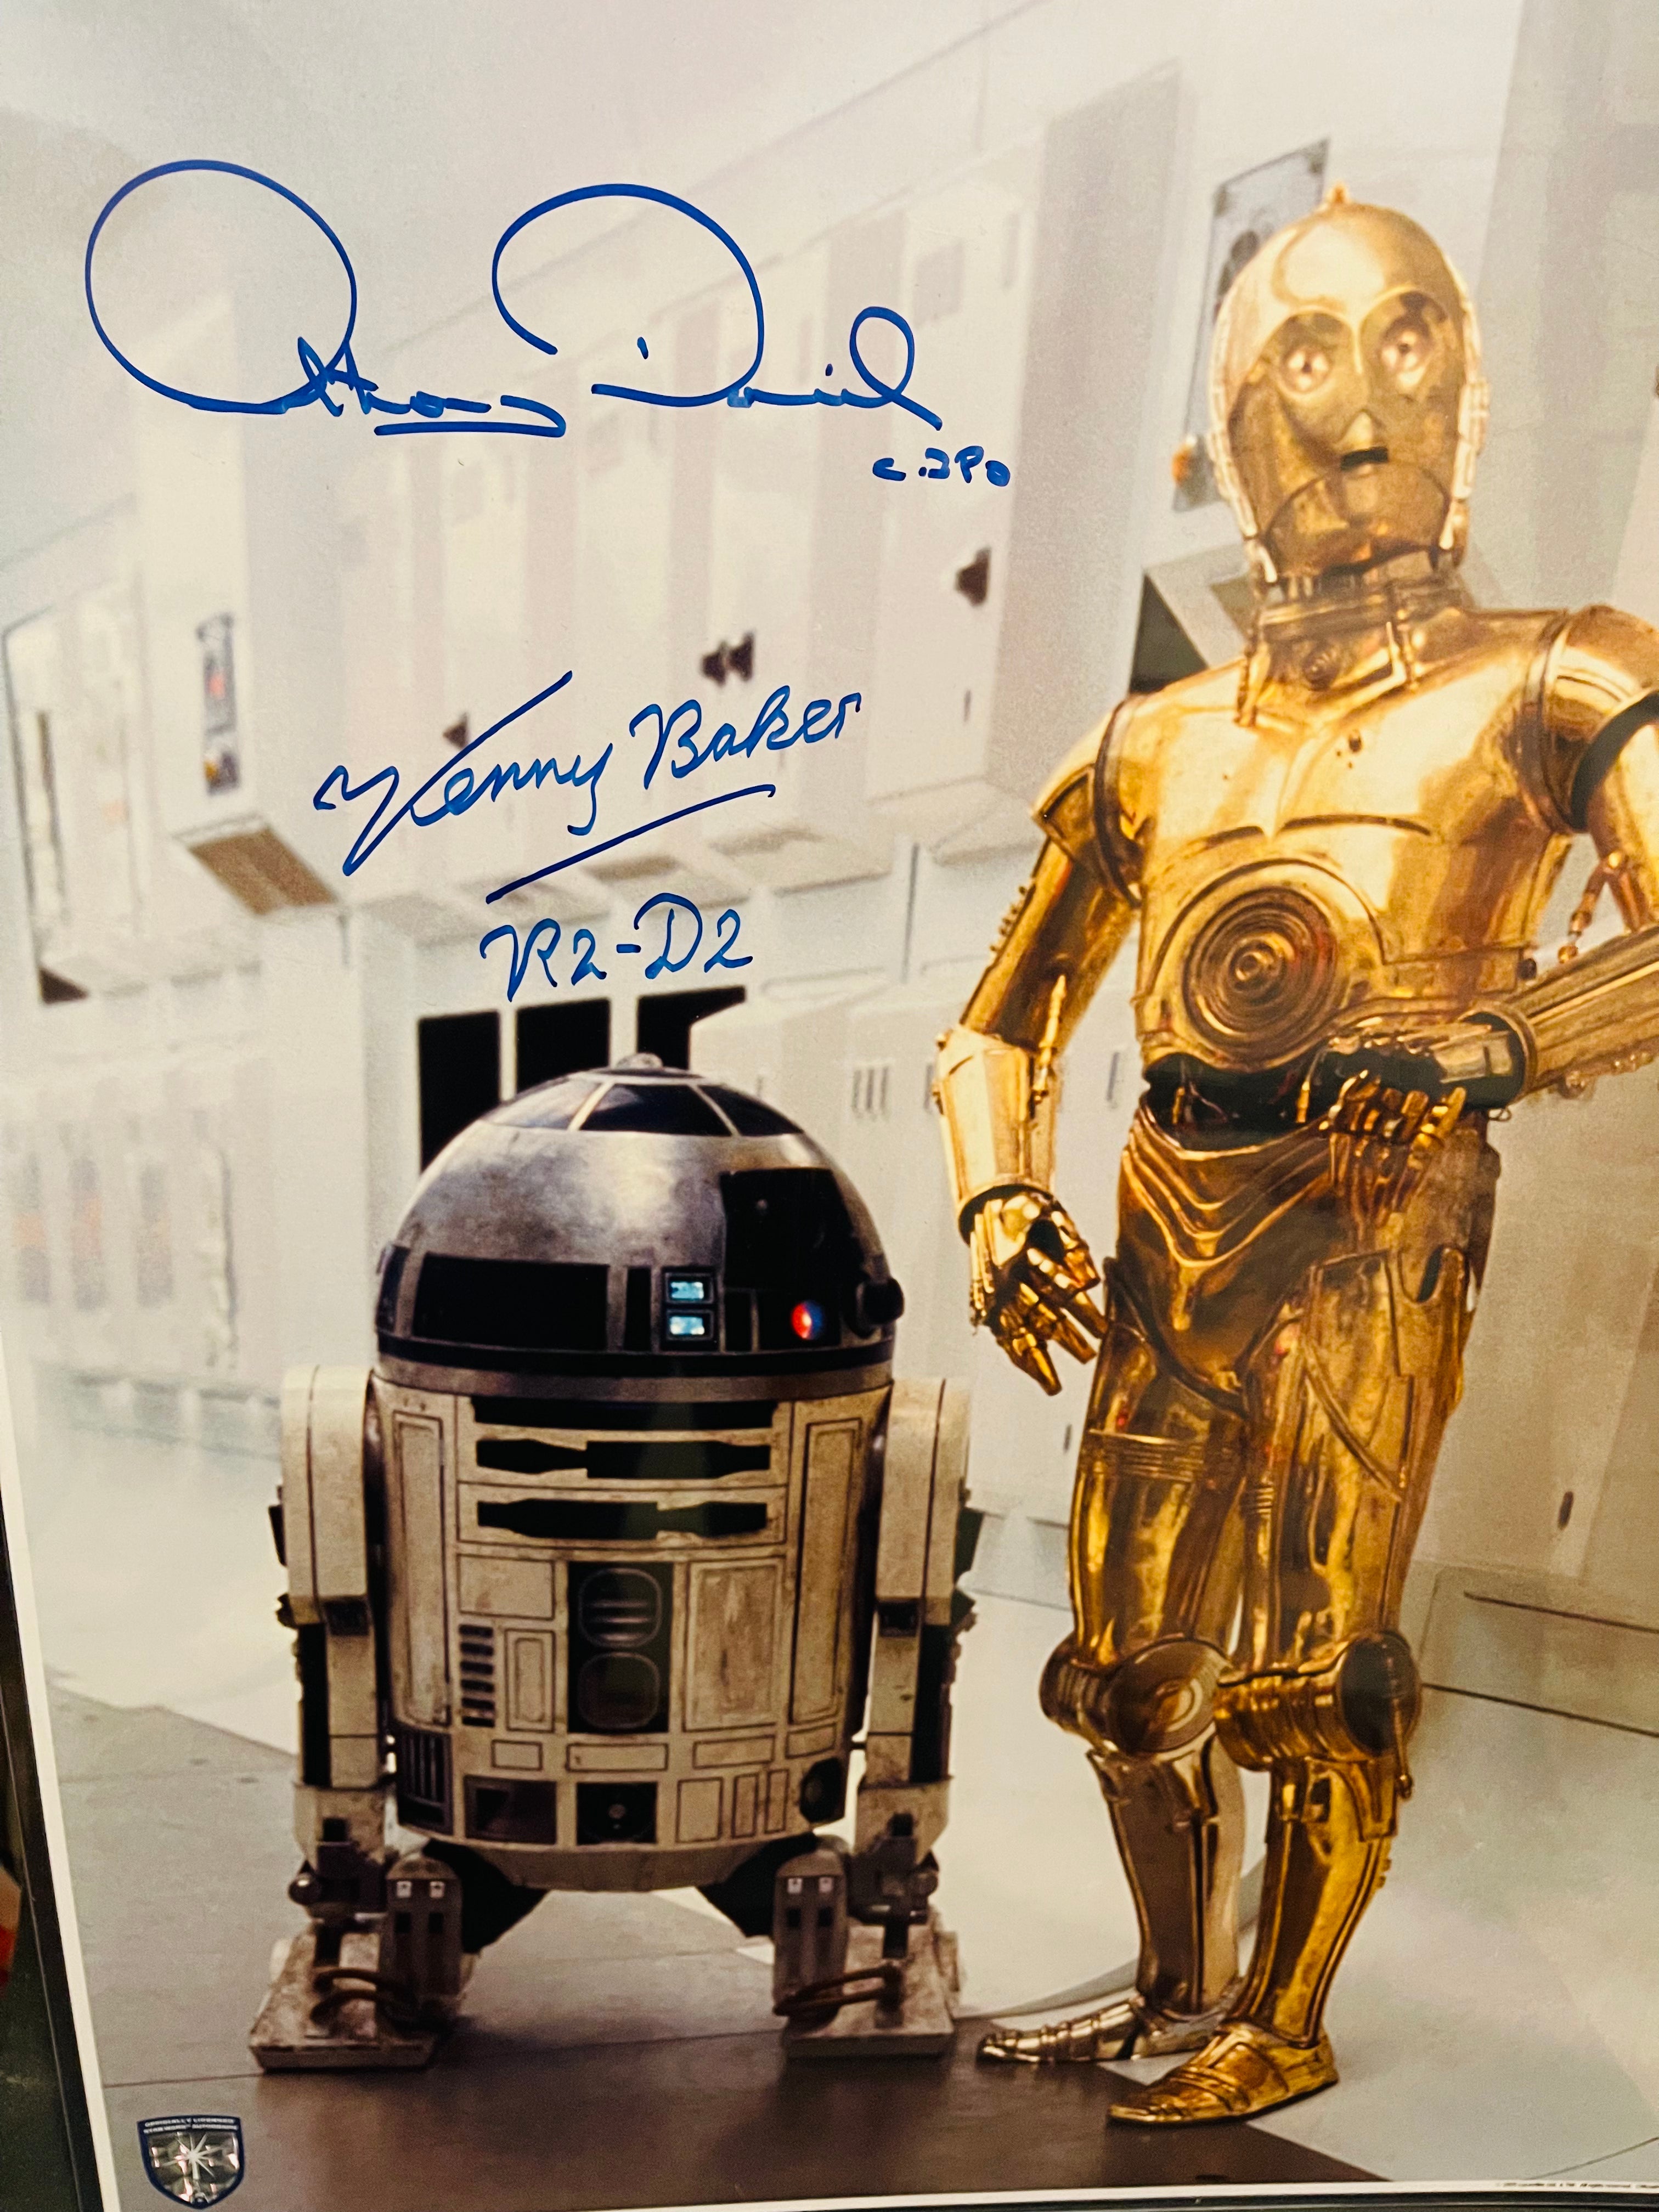 Star Wars Anthony Daniels and Kenny Baker rare 16x20 double autograph with Official Pix COA